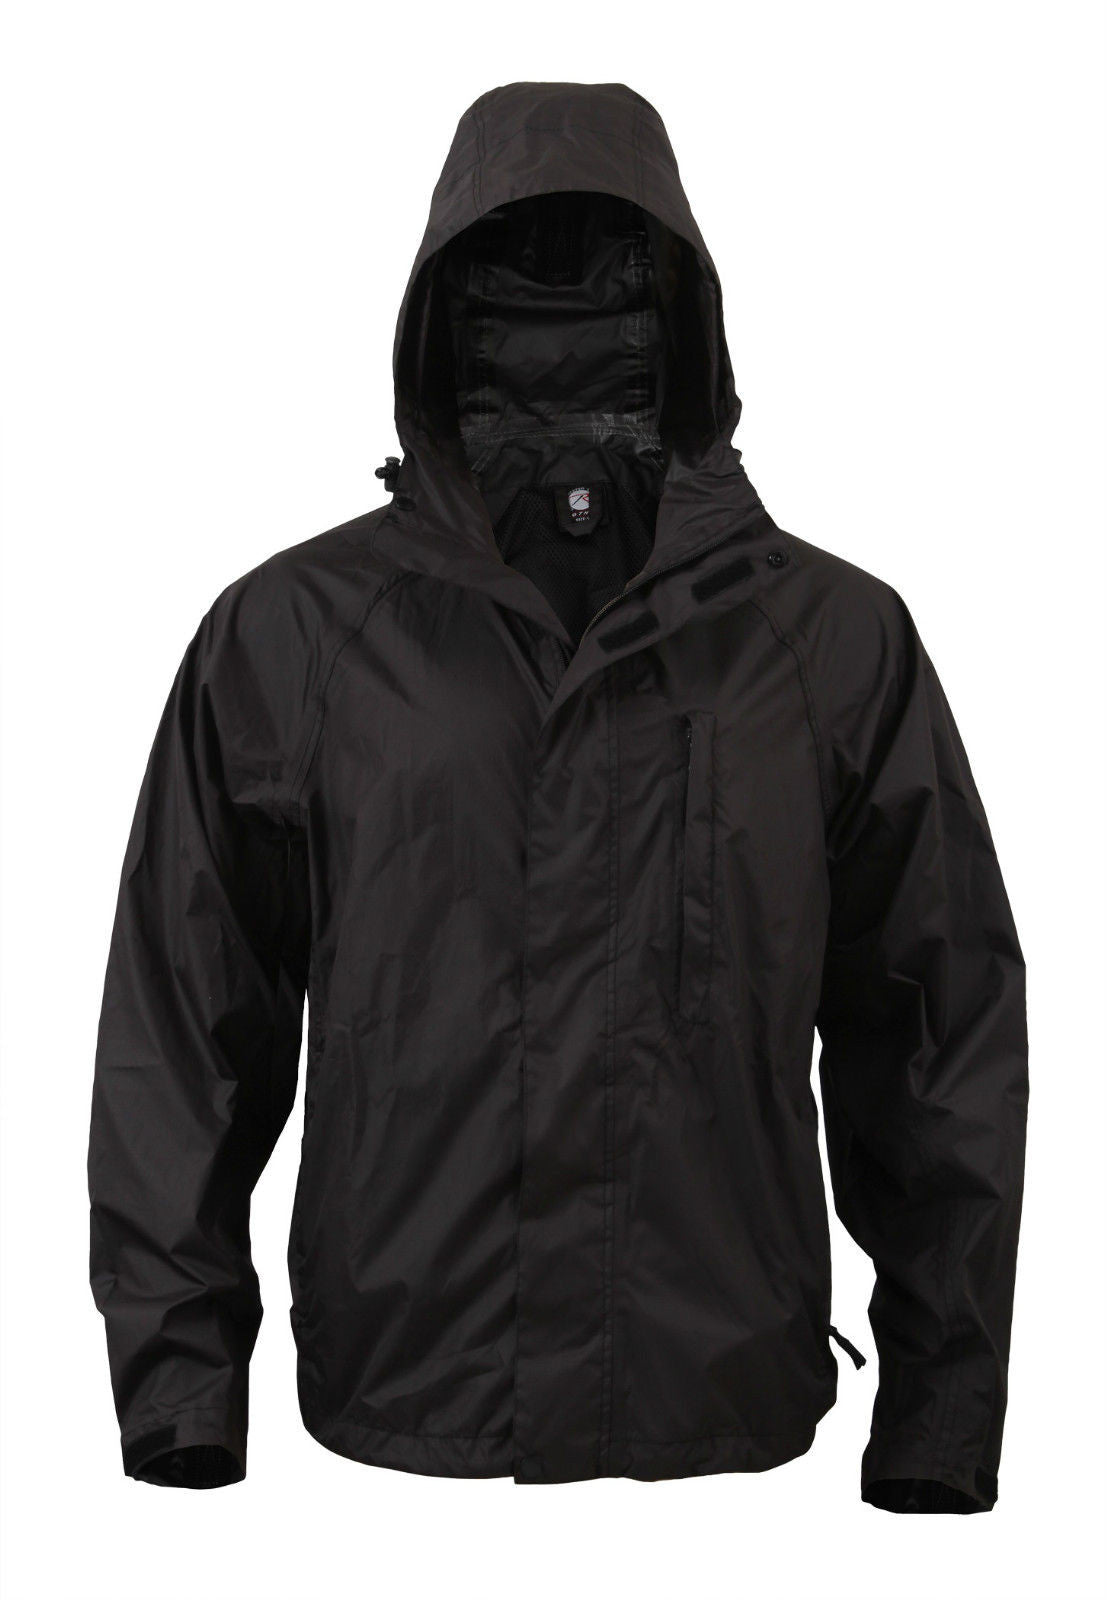 Rothco Packable Black Rain Coat Jacket - Folds into its own Pack ...